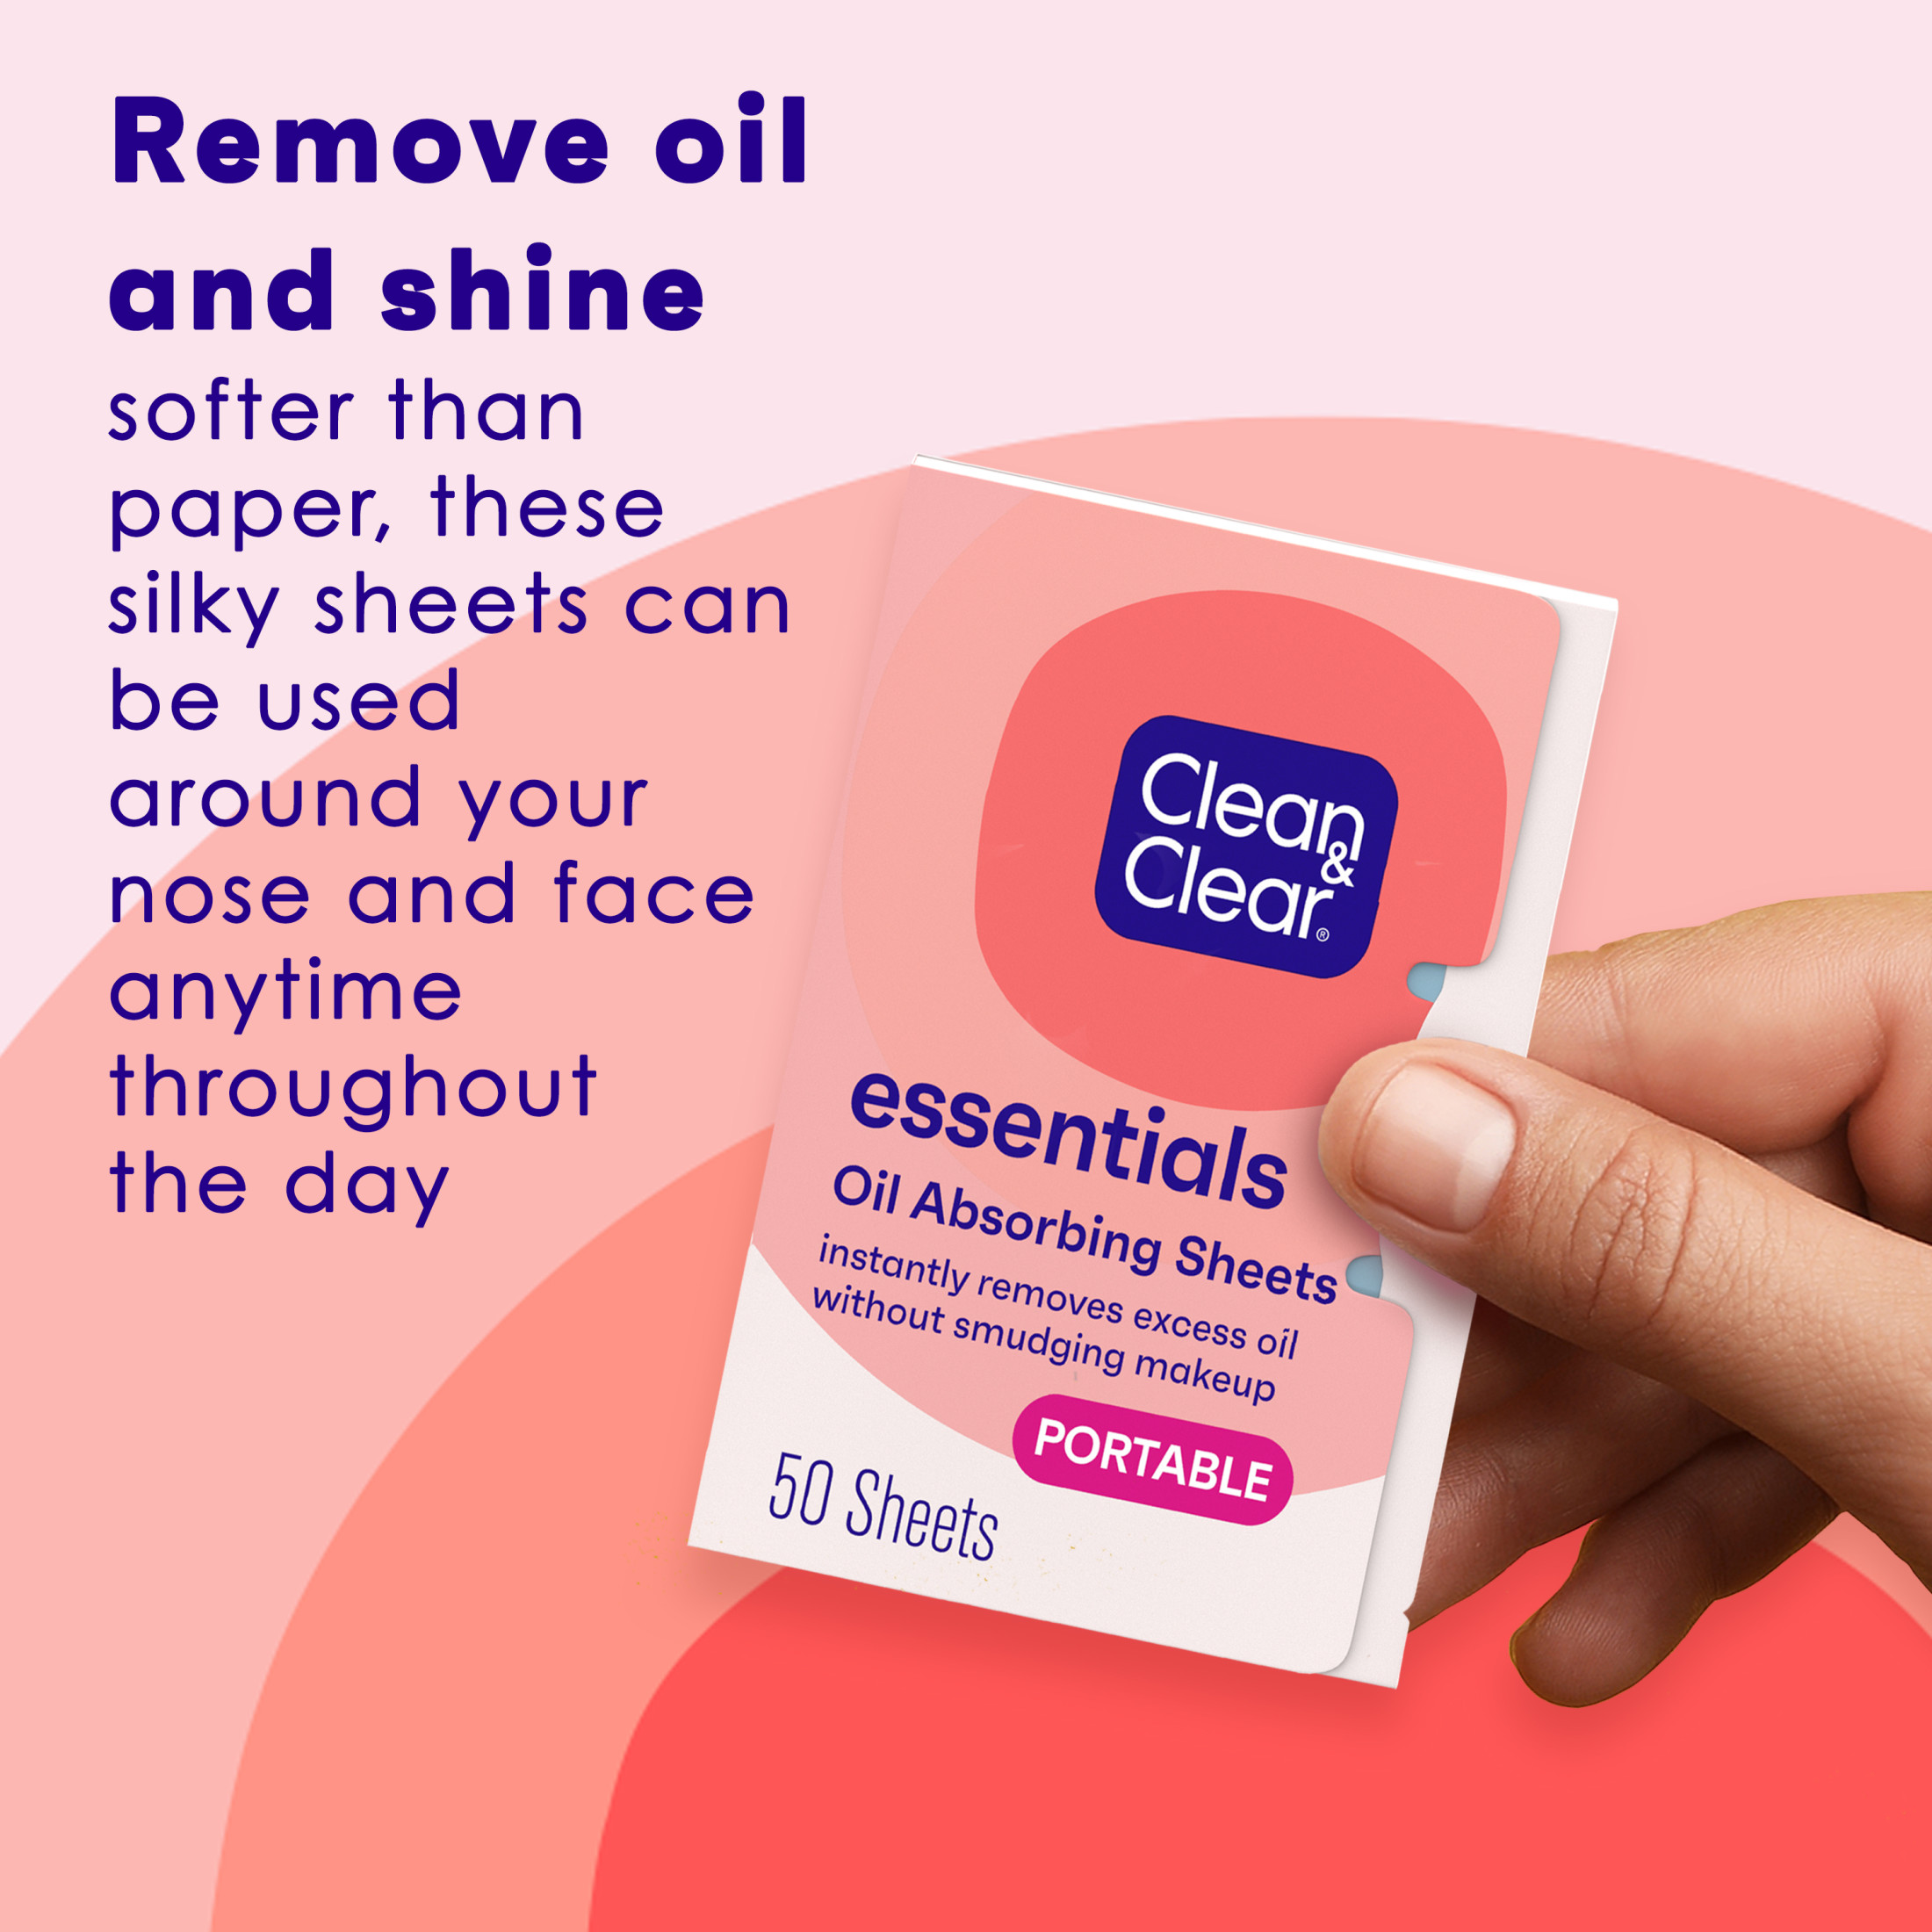 Clean & Clear Essentials Oil Absorbing Sheets for Oily Skin, 50 Ct - image 3 of 9